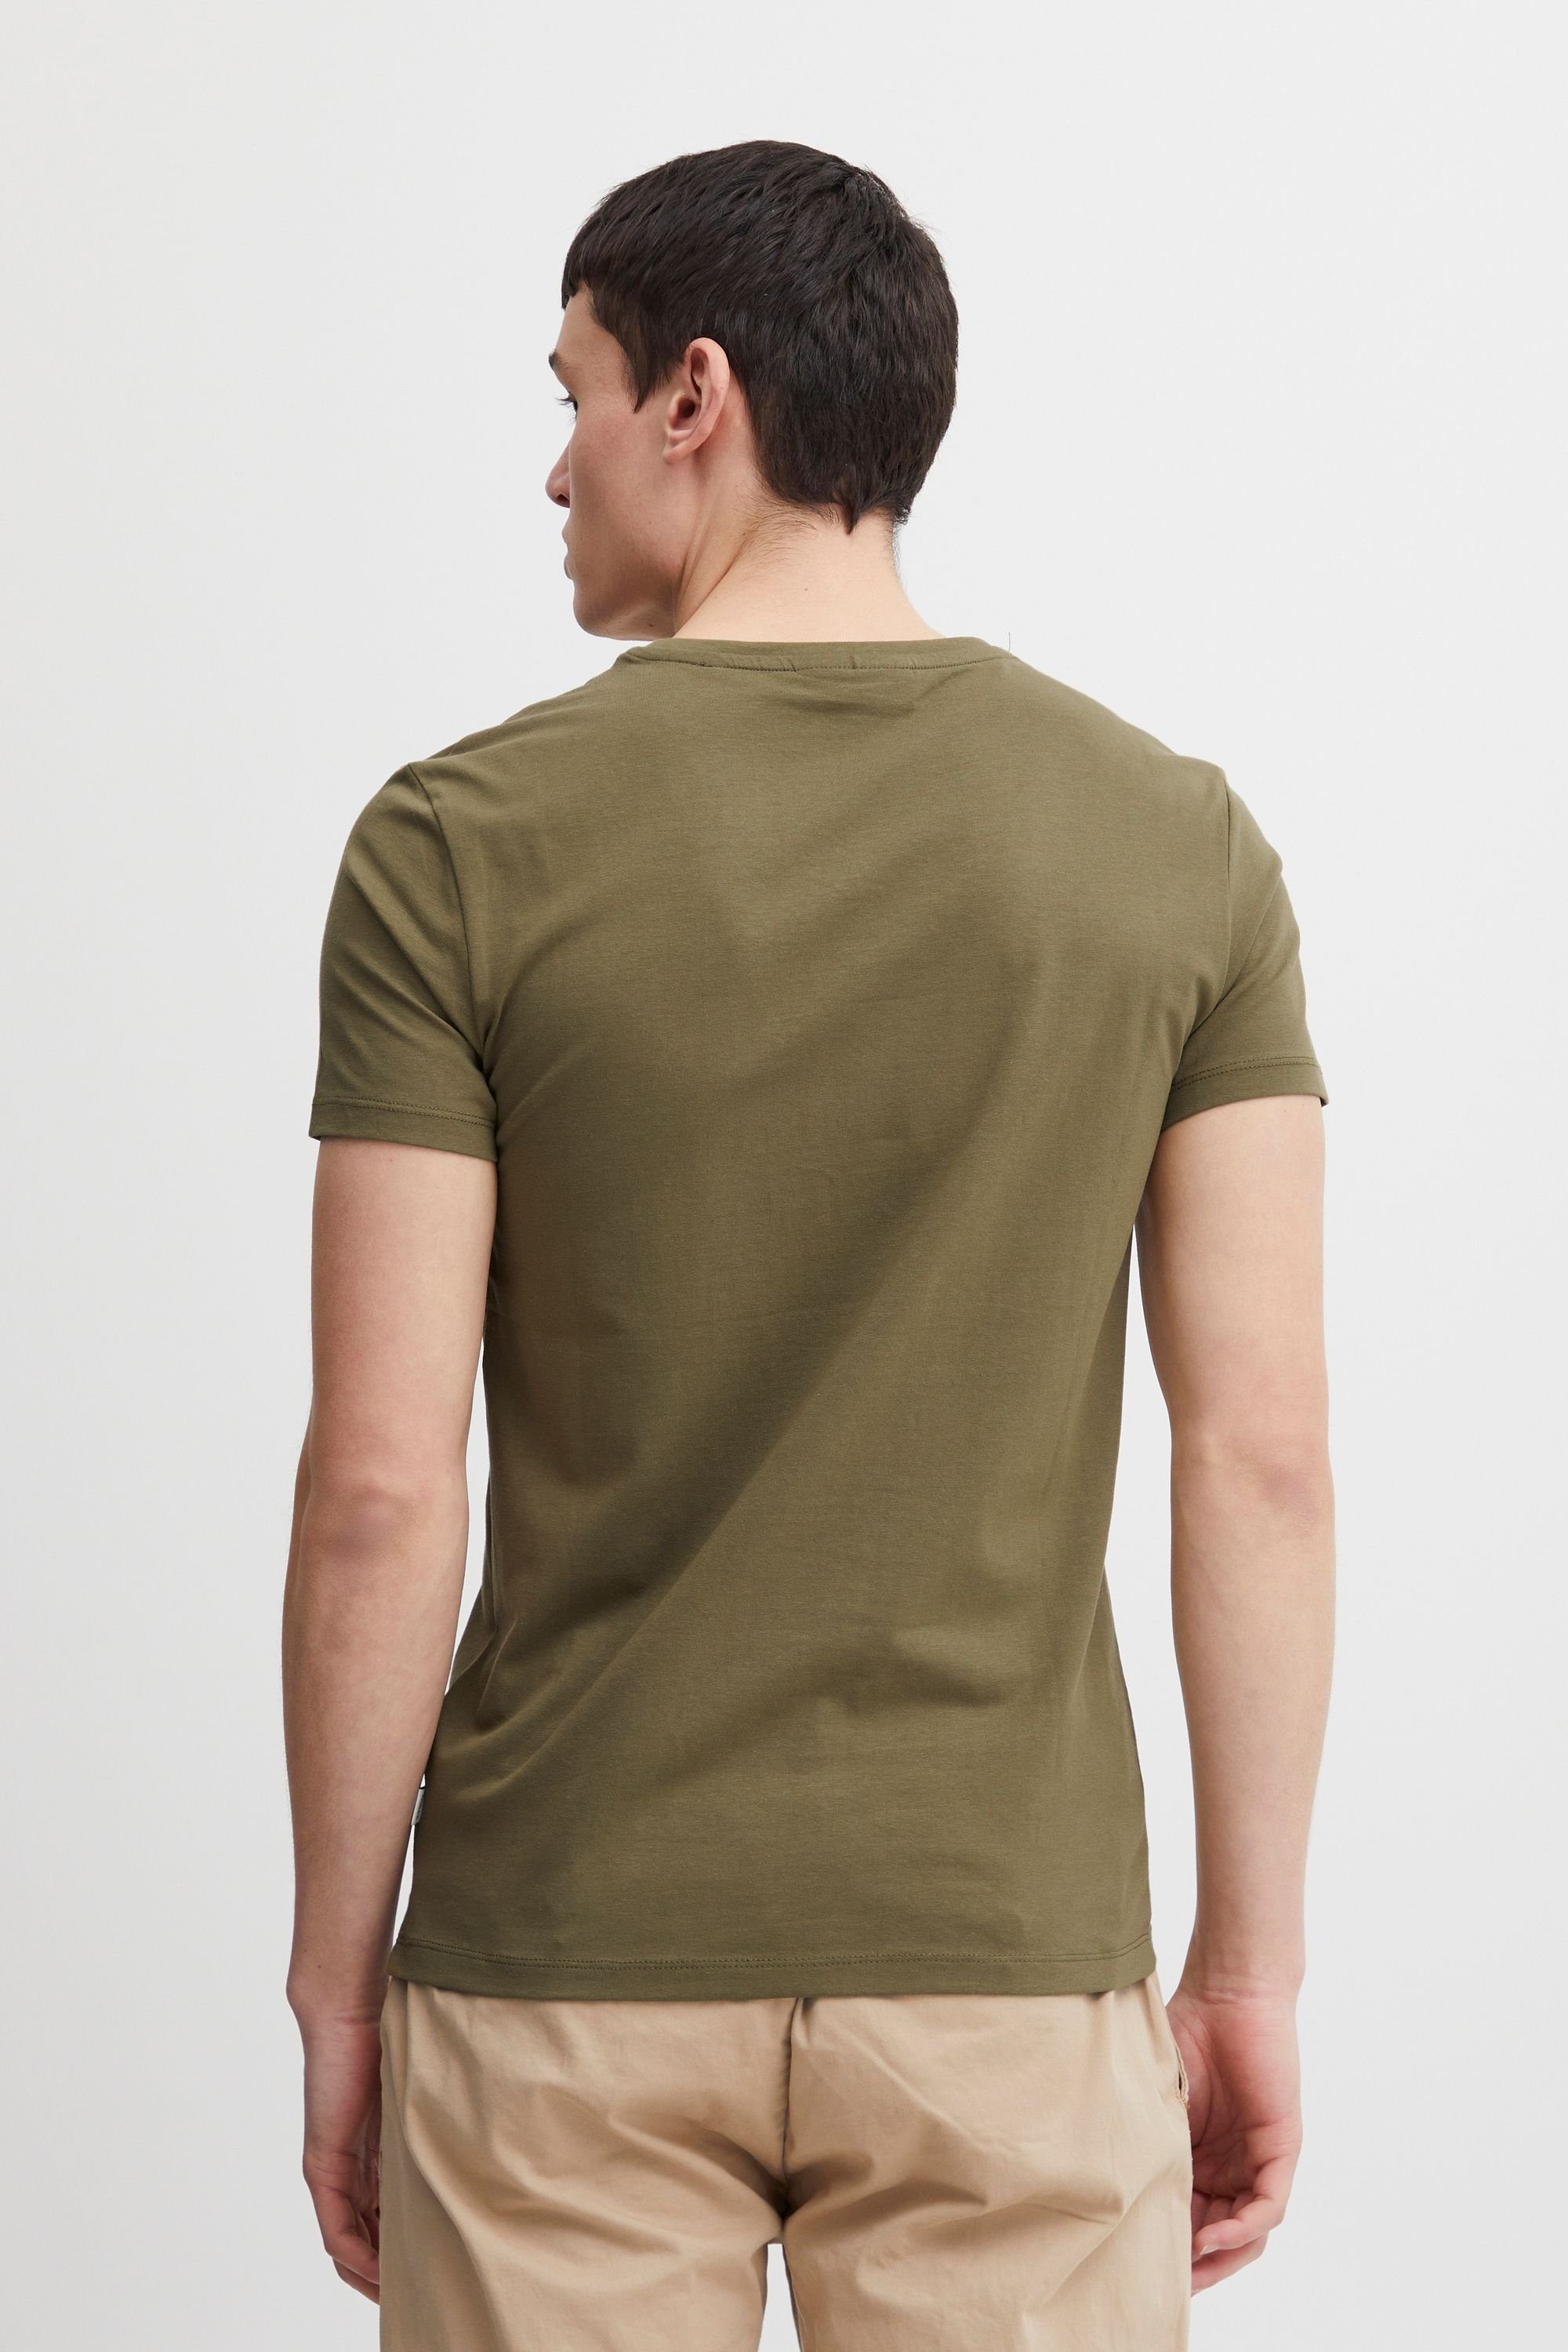 T-Shirt CFLincoln Casual 20503062 Friday - Olive Burnt (180521)